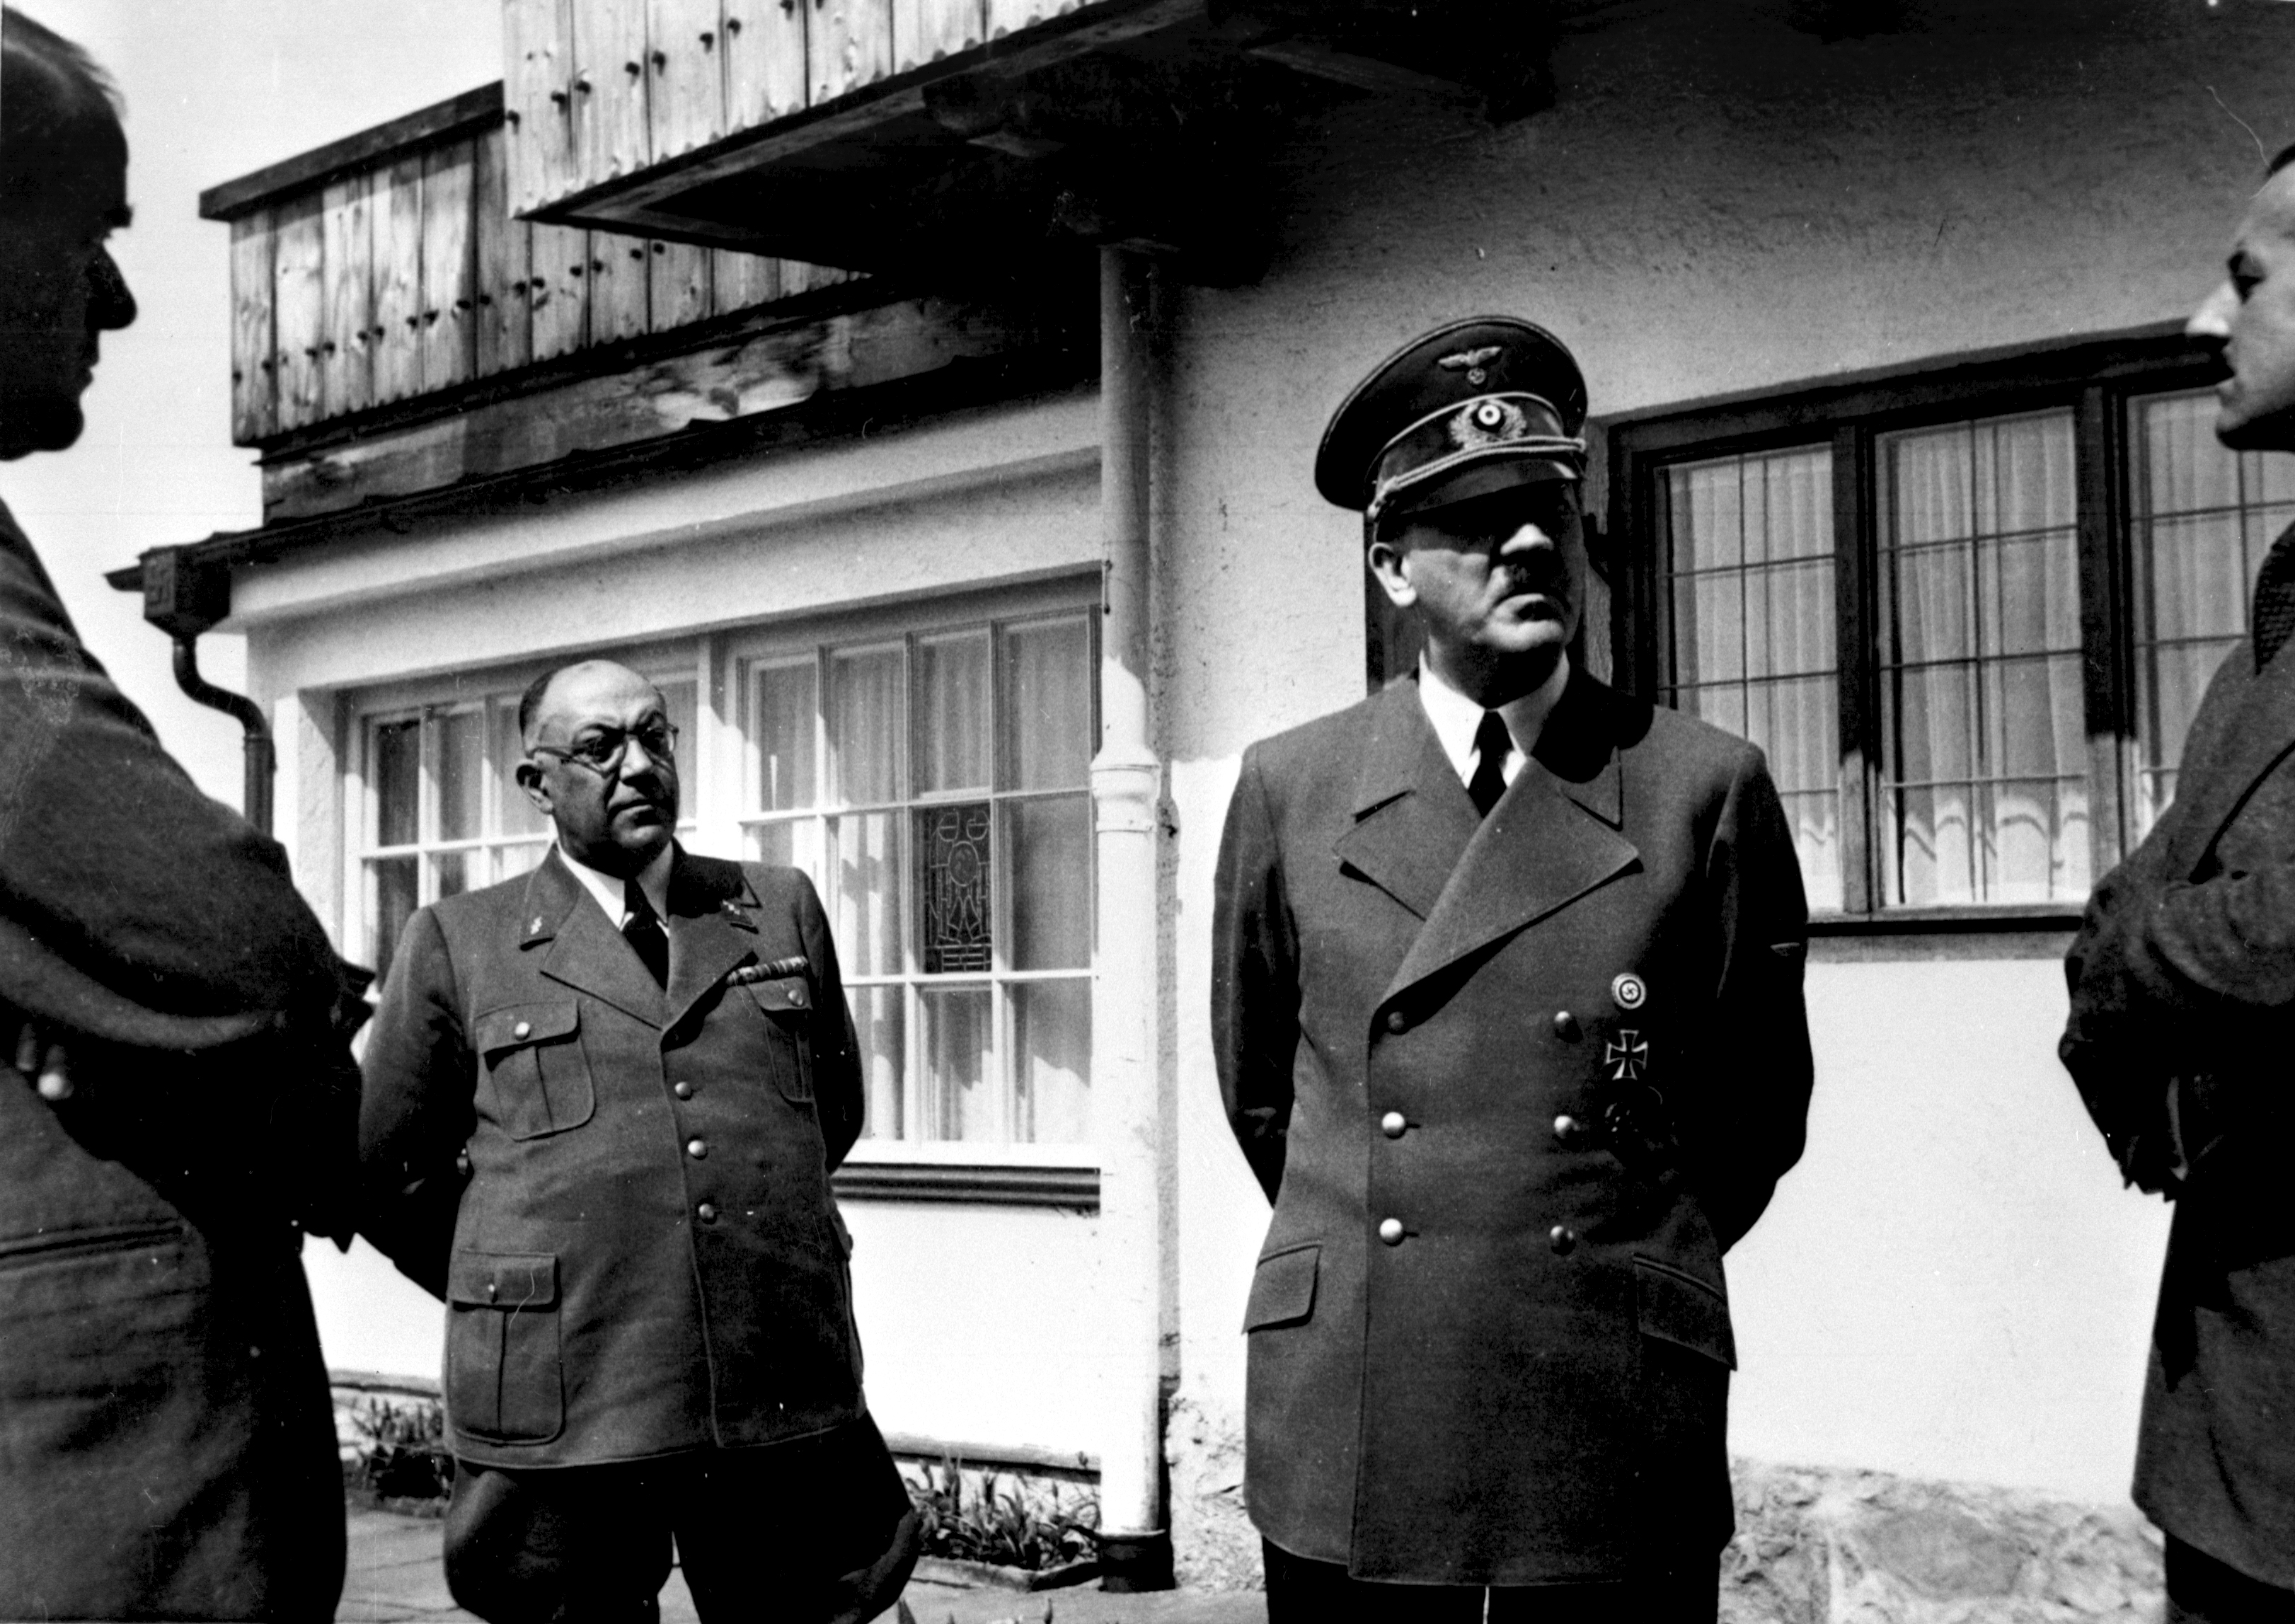 Adolf Hitler on the Berghof terrace in the summer of 1940, from Eva Braun's albums